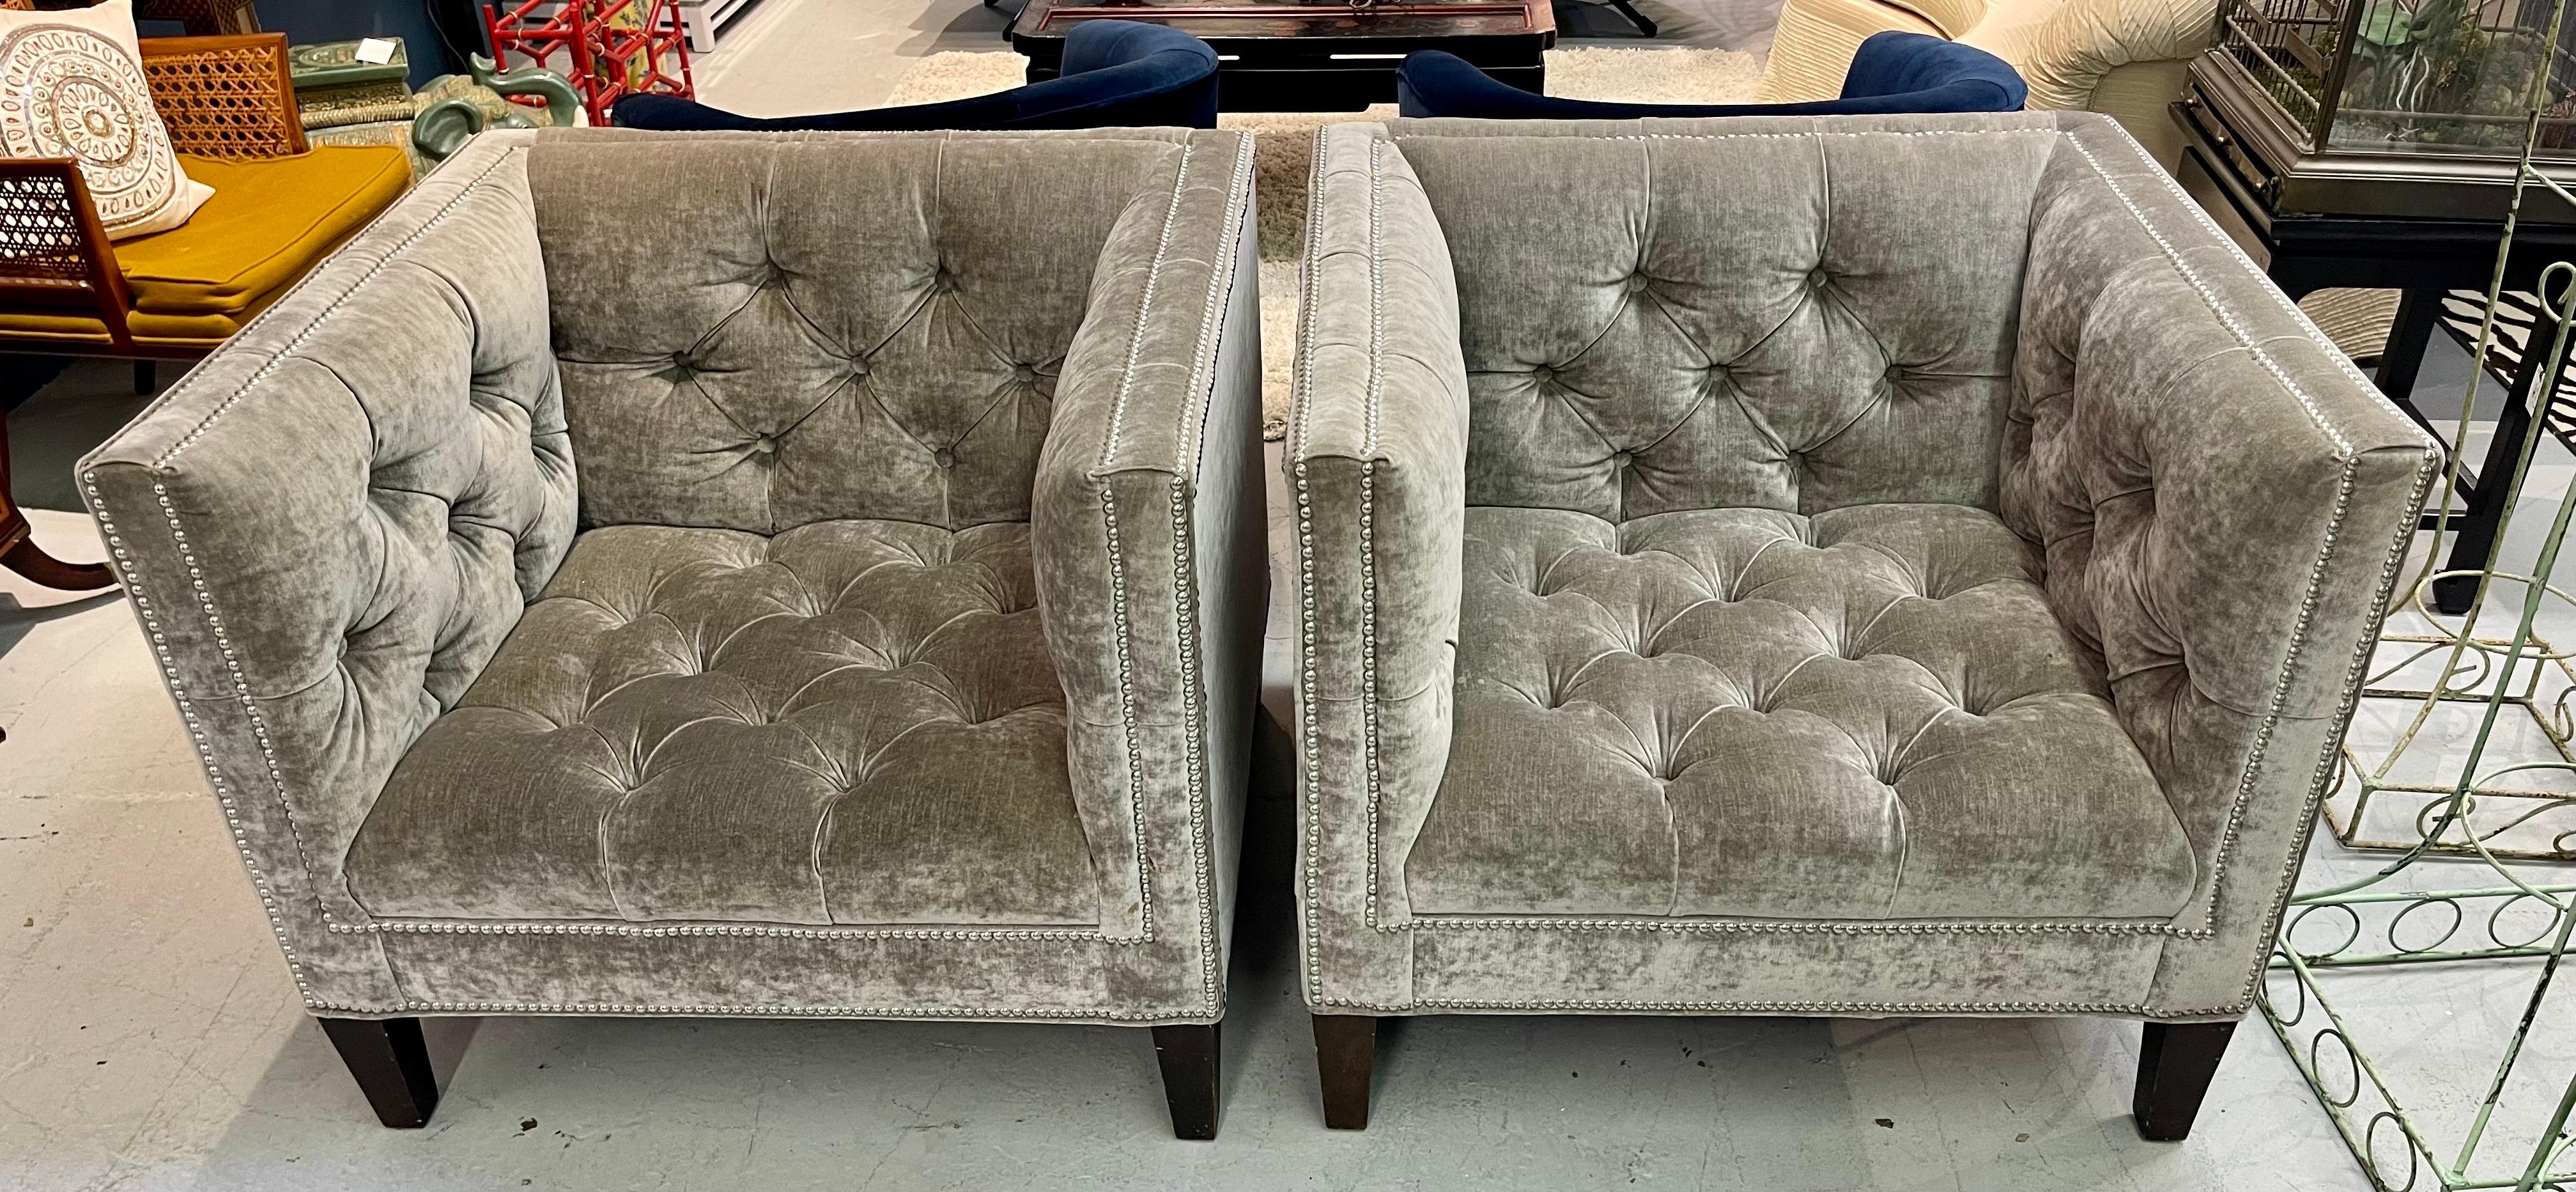 Elegant pair of matching square back transitional chairs with full chesterfield style tufting as shown in attached pictures.  The velvet/mohair fabric is gray and the chairs are adorned with silver naiheads as shown.  Very sleek, yet transitional.